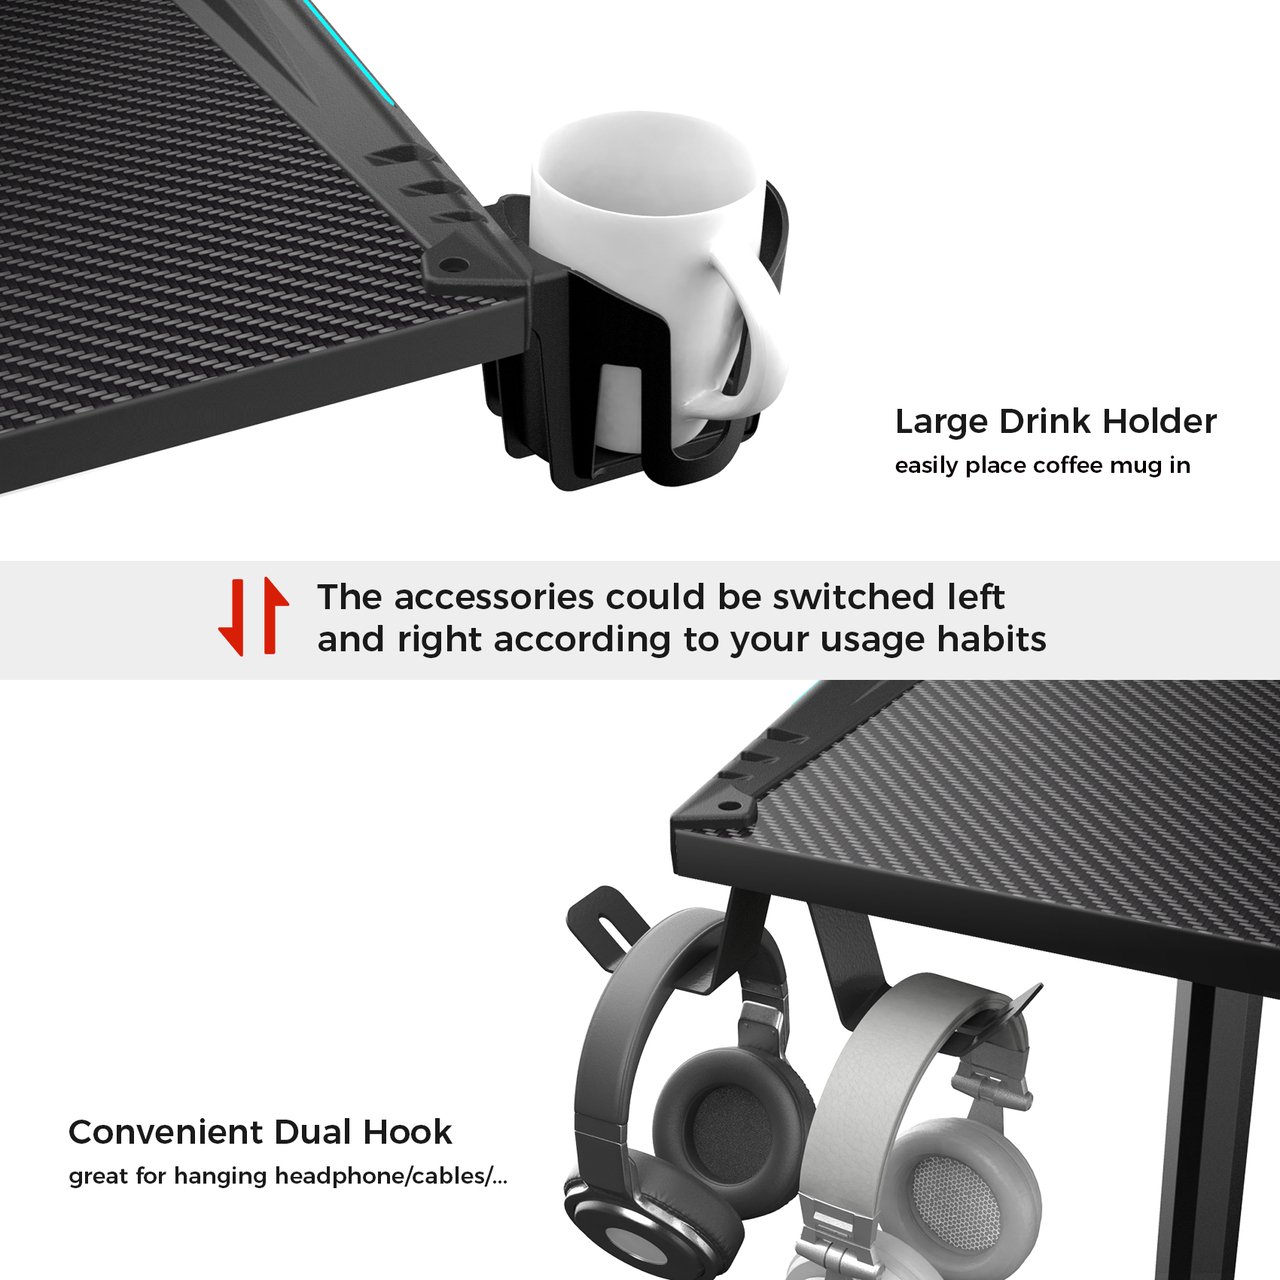 Built-In Cup Holder and Headphone Hook